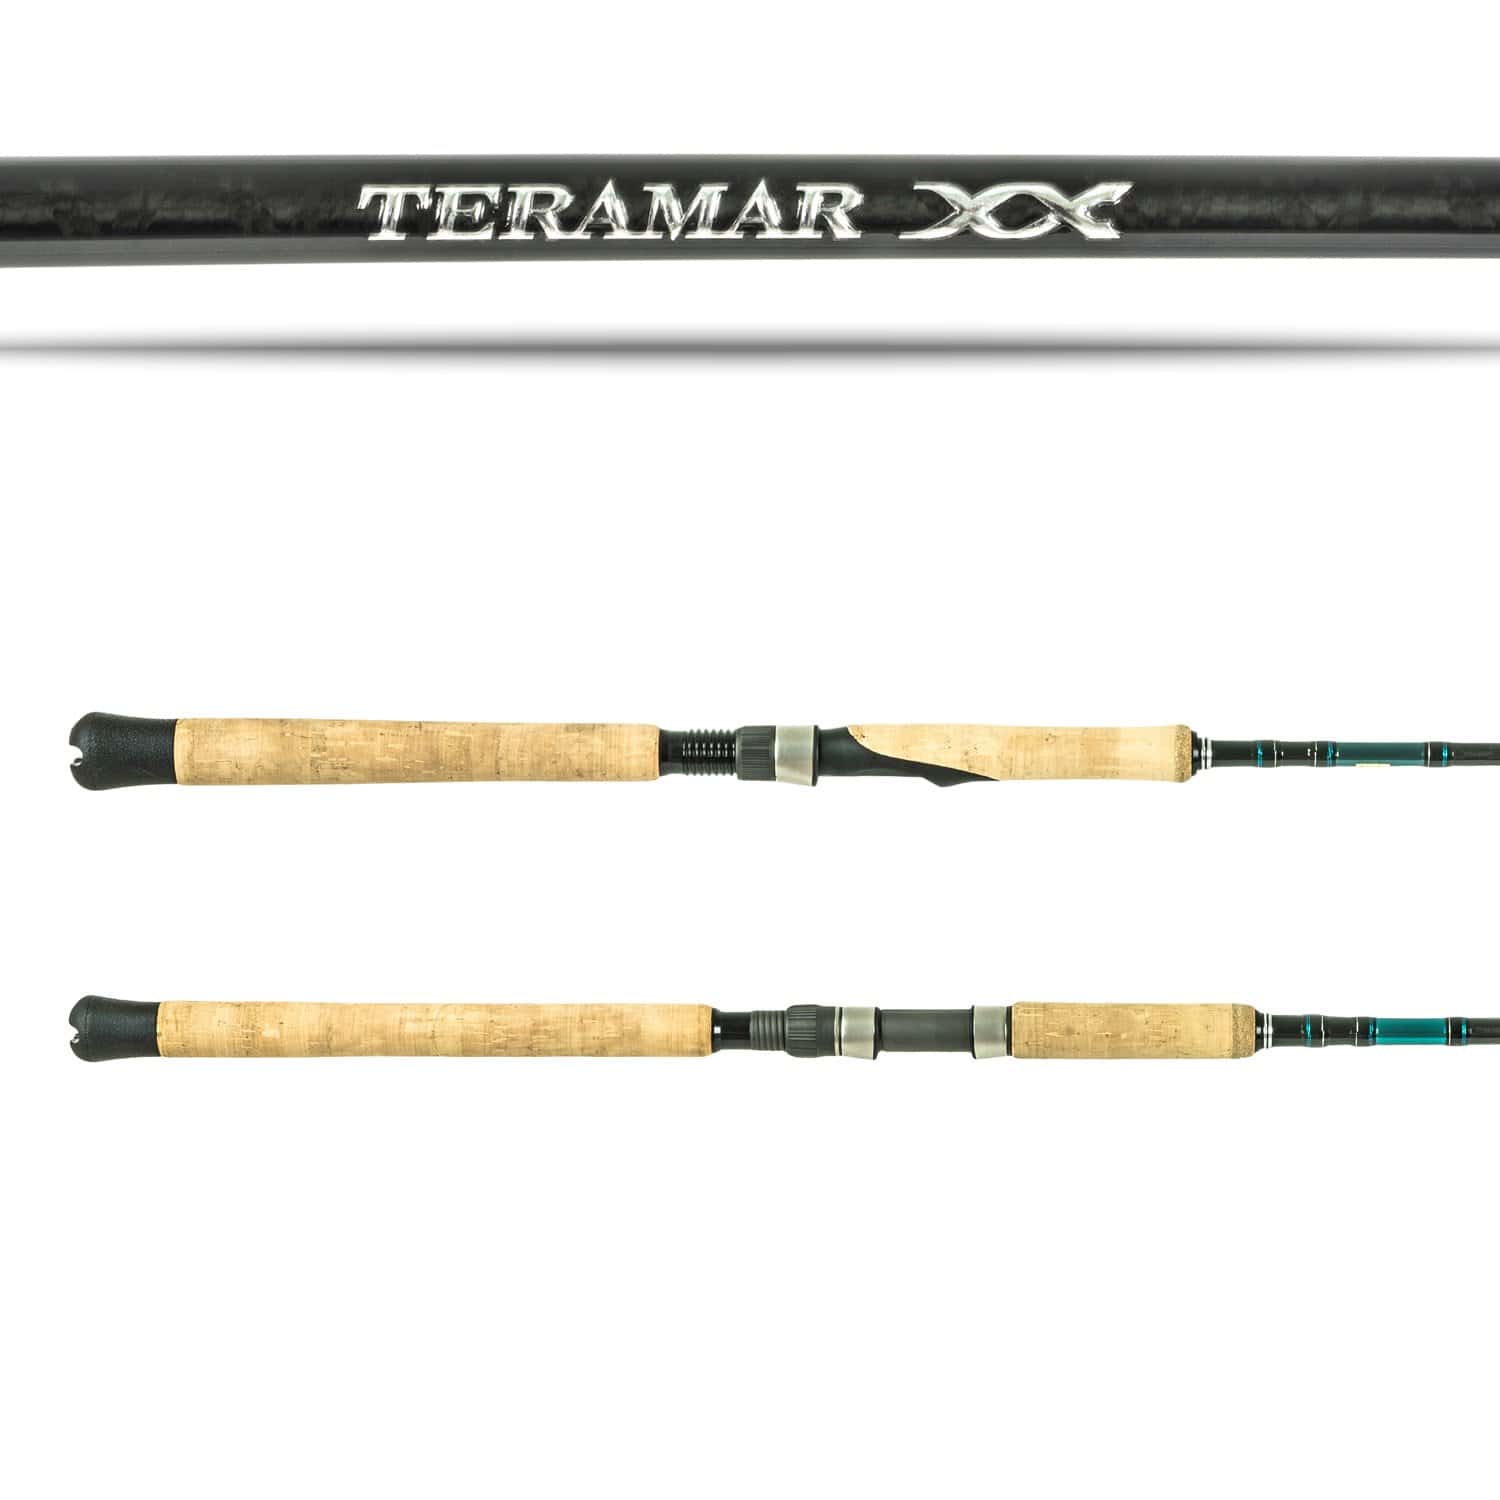 Star Rods VPR Inshore Spinning Rods - The Saltwater Edge